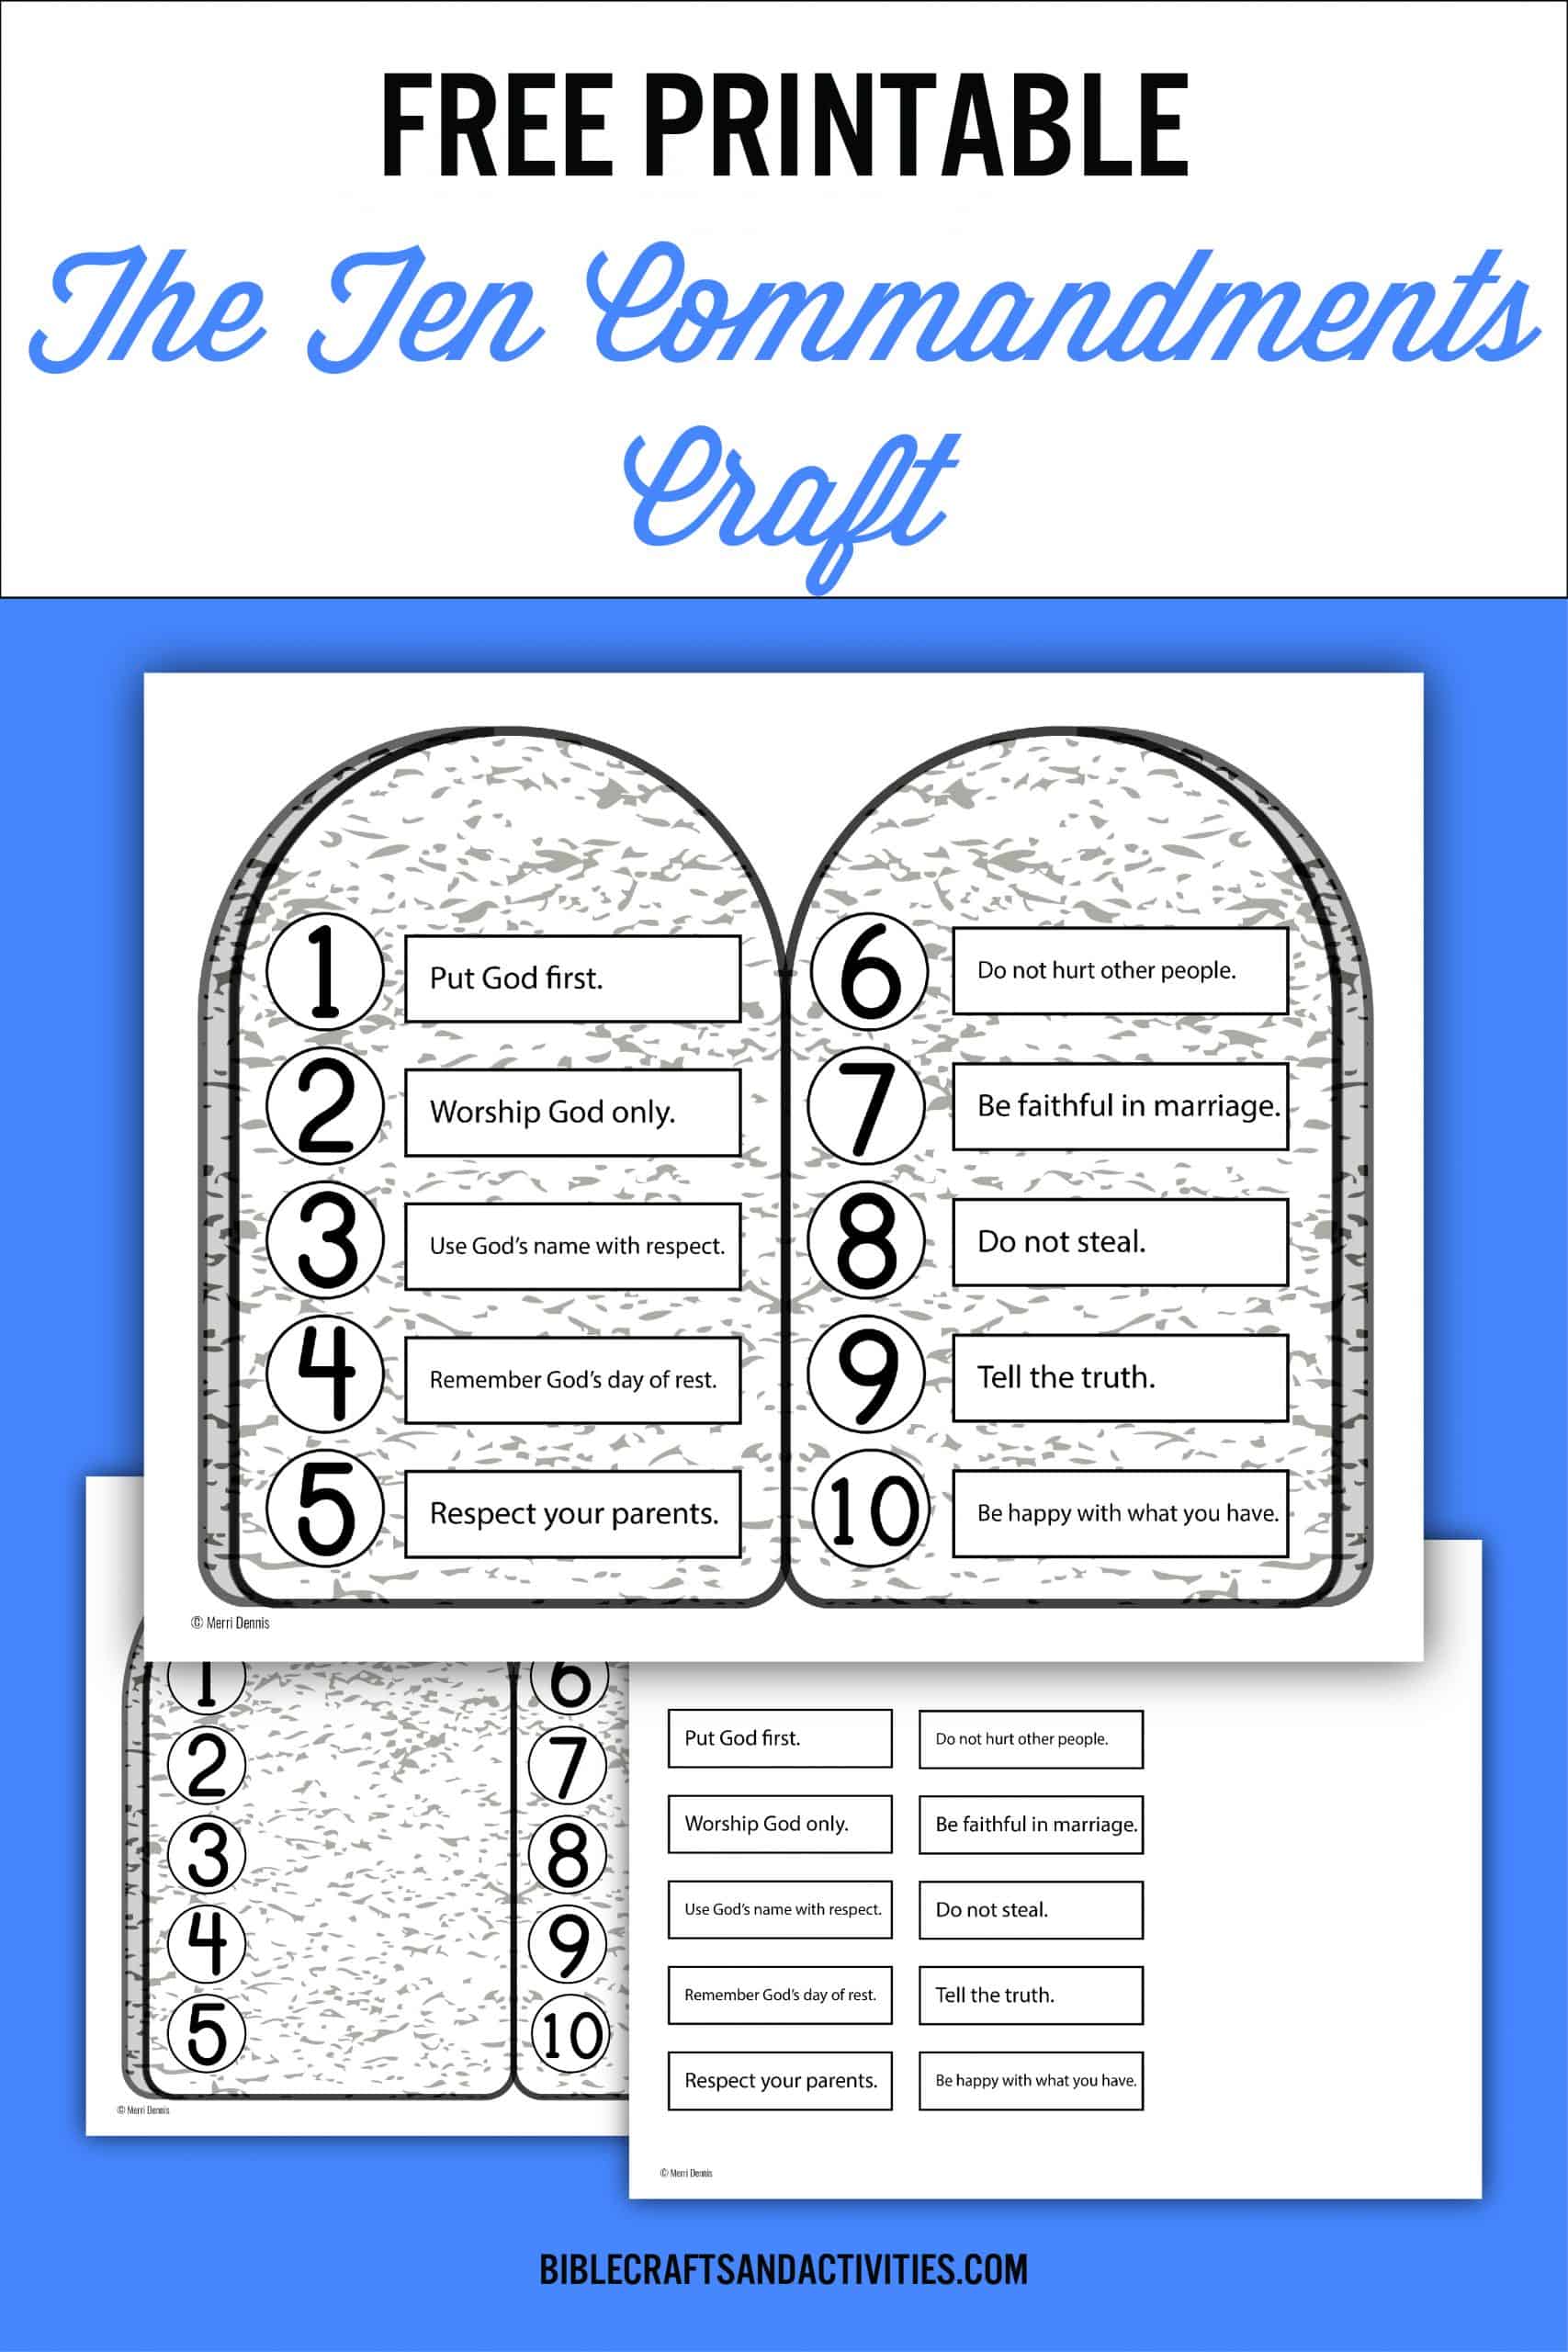 14 Best Images Of Free Printable 10 Commandments Worksheets Free